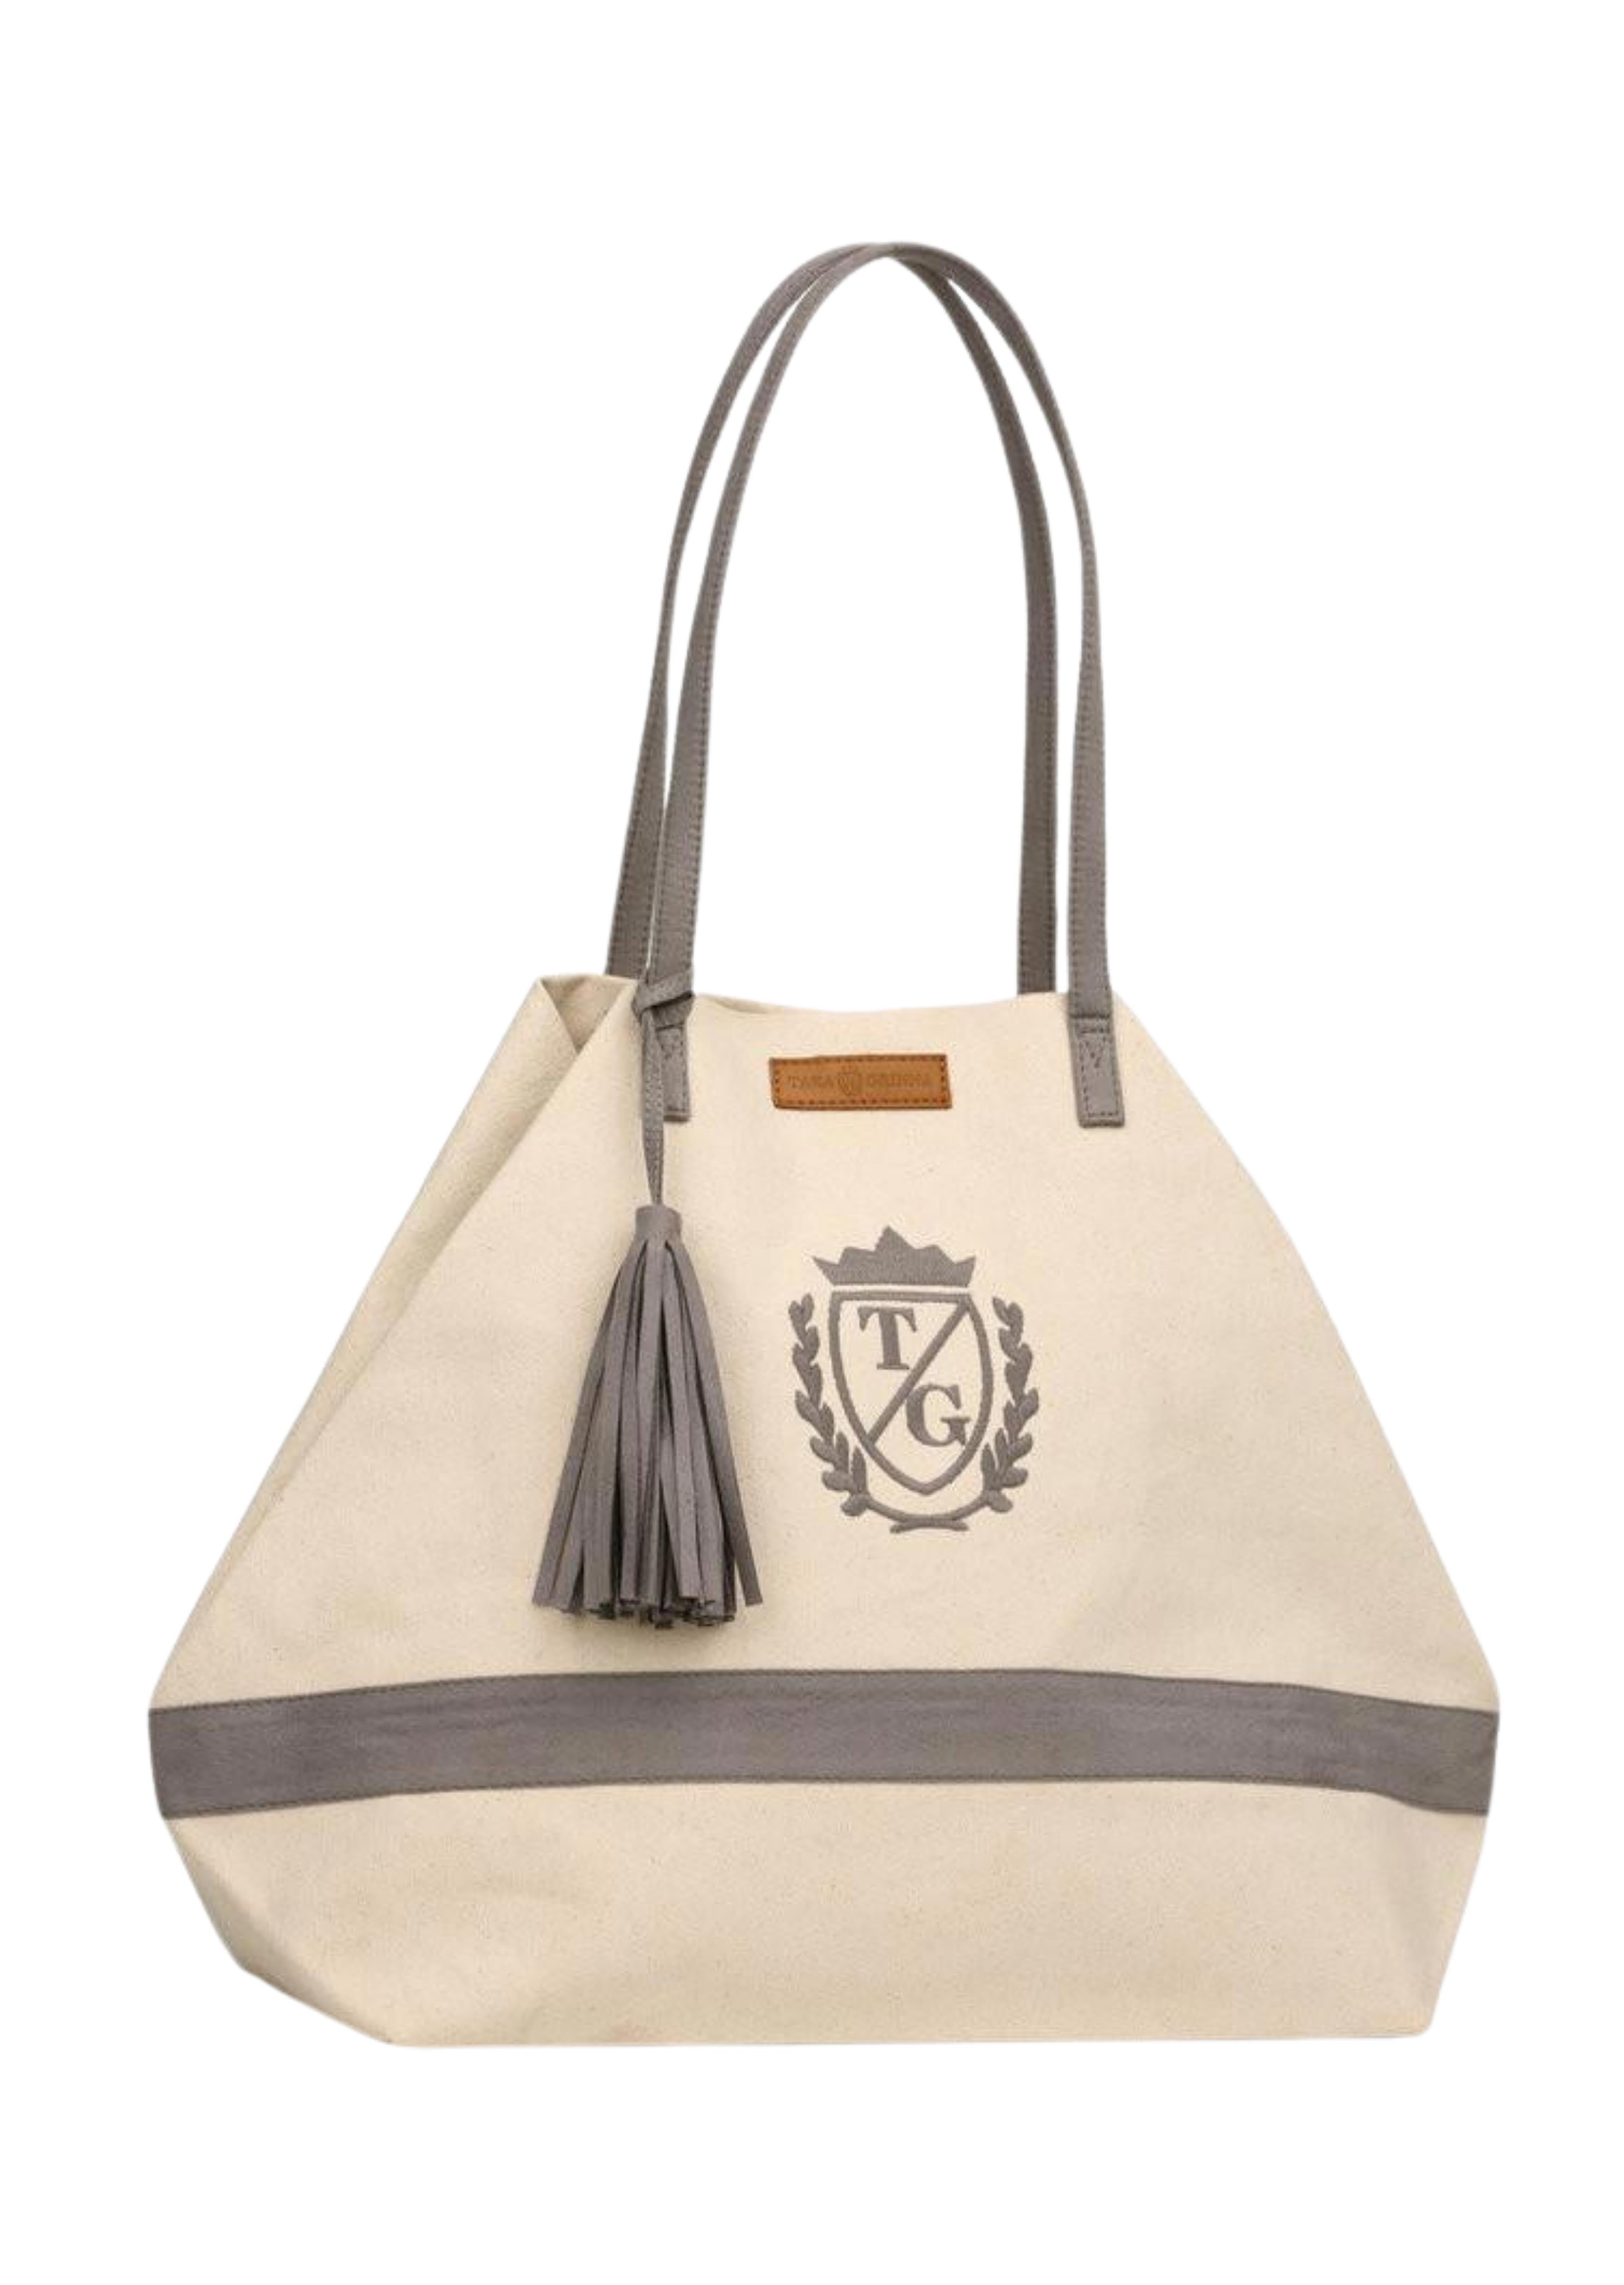 Tara Grinna Lucky Tote in Gray